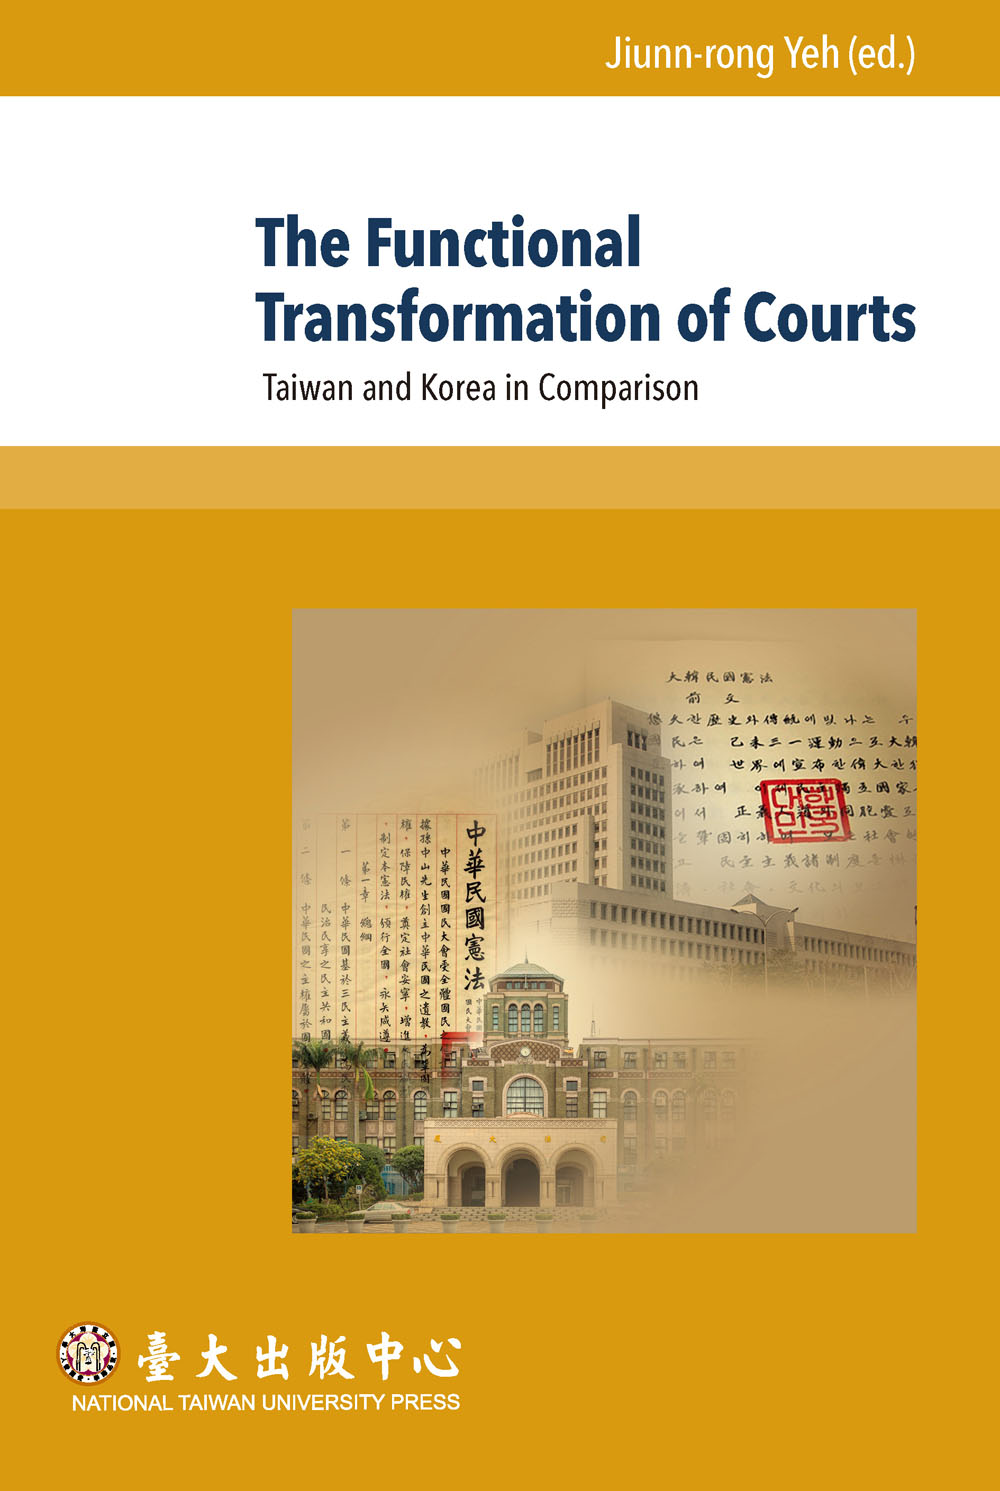 The Functional Transformation of Courts: Taiwan and Korea in Comparison